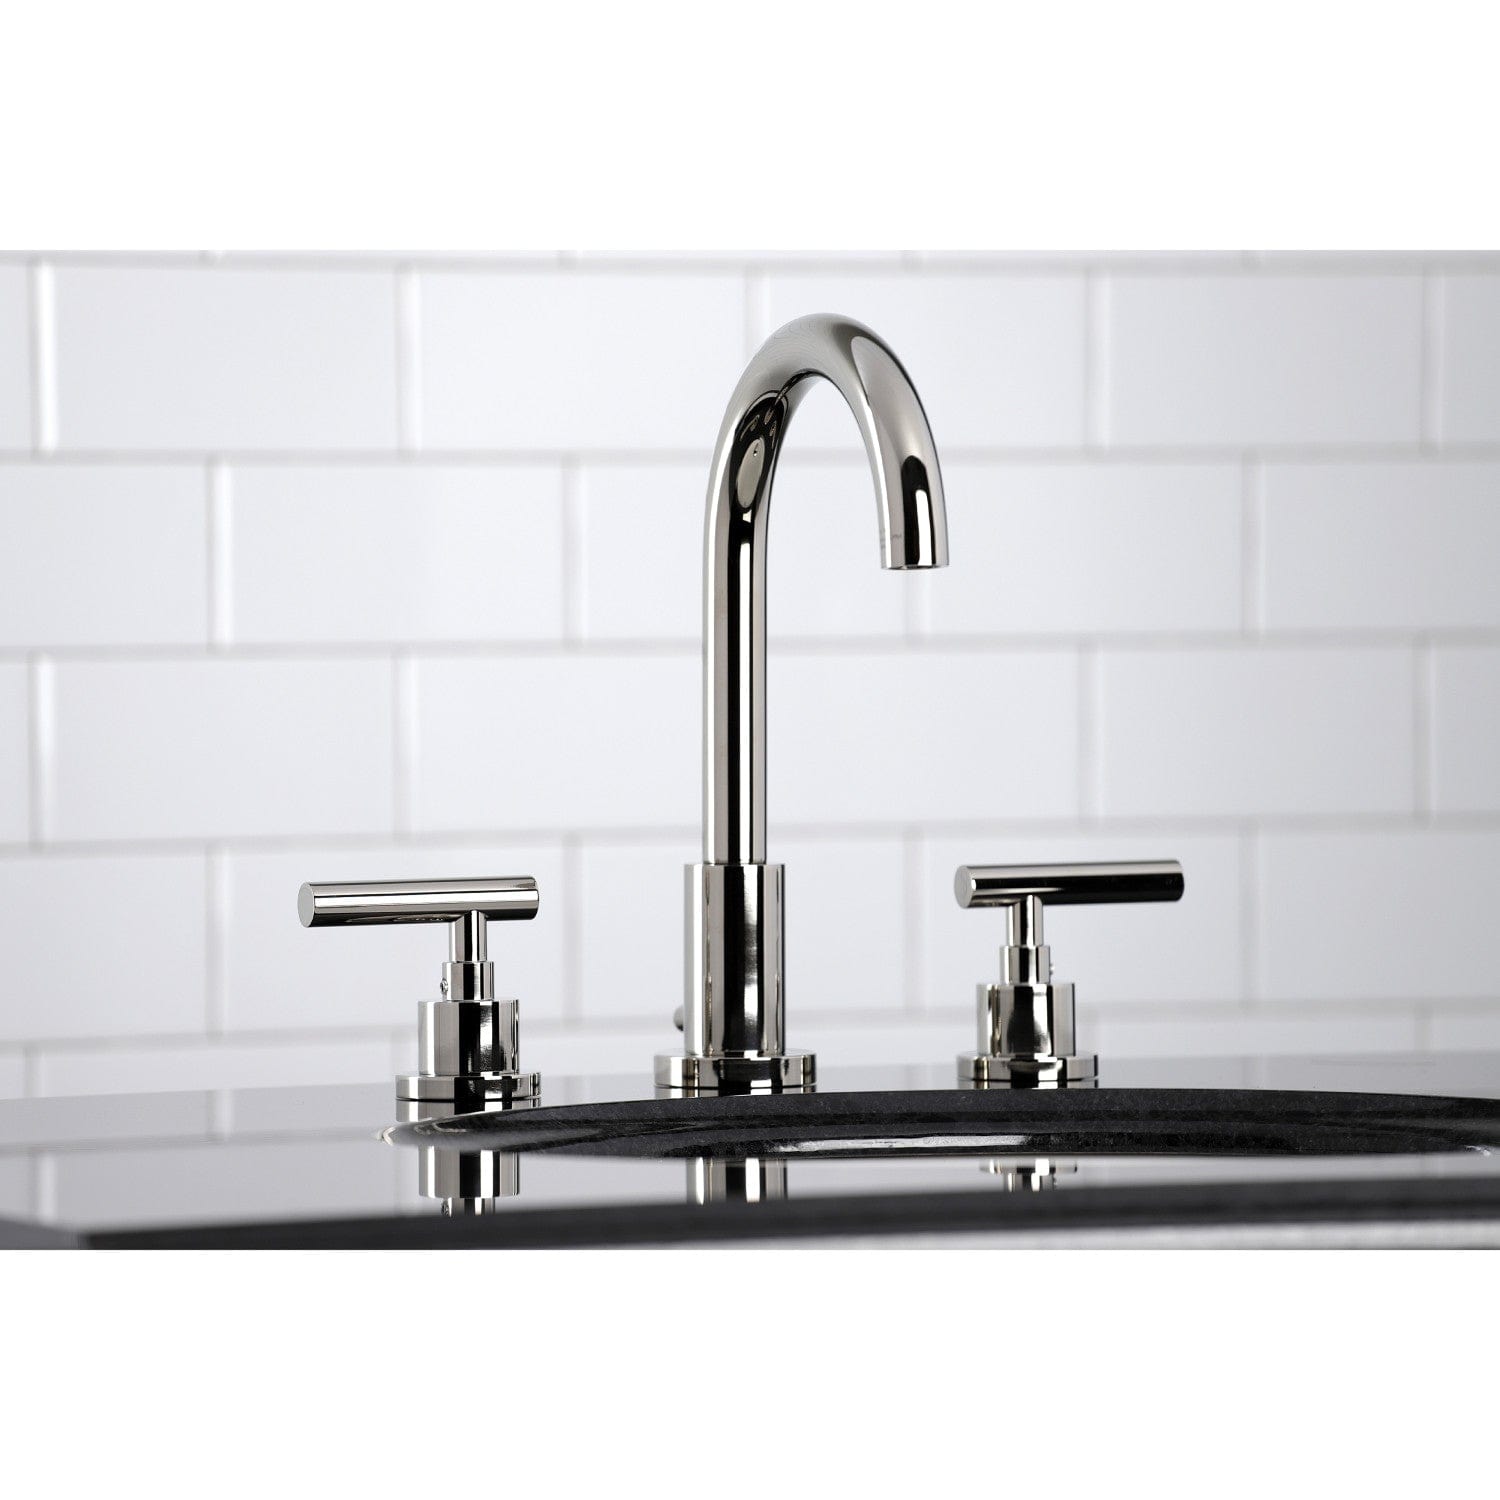 KINGSTON Brass Manhattan Widespread Bathroom Faucet with Brass Pop-Up - Polished Nickel